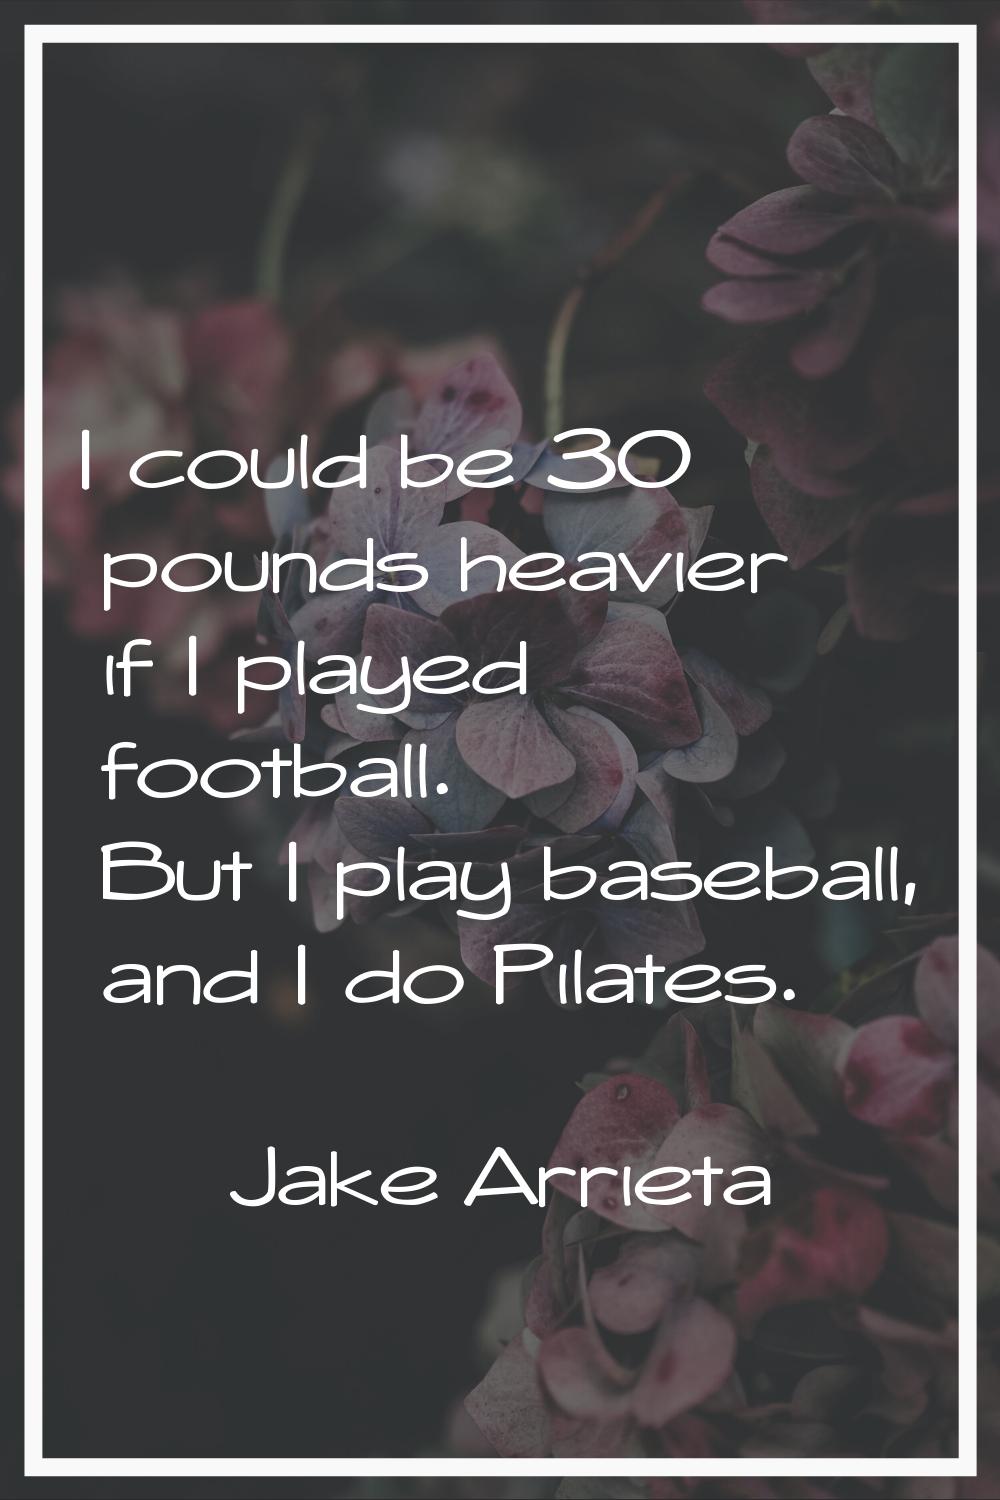 I could be 30 pounds heavier if I played football. But I play baseball, and I do Pilates.